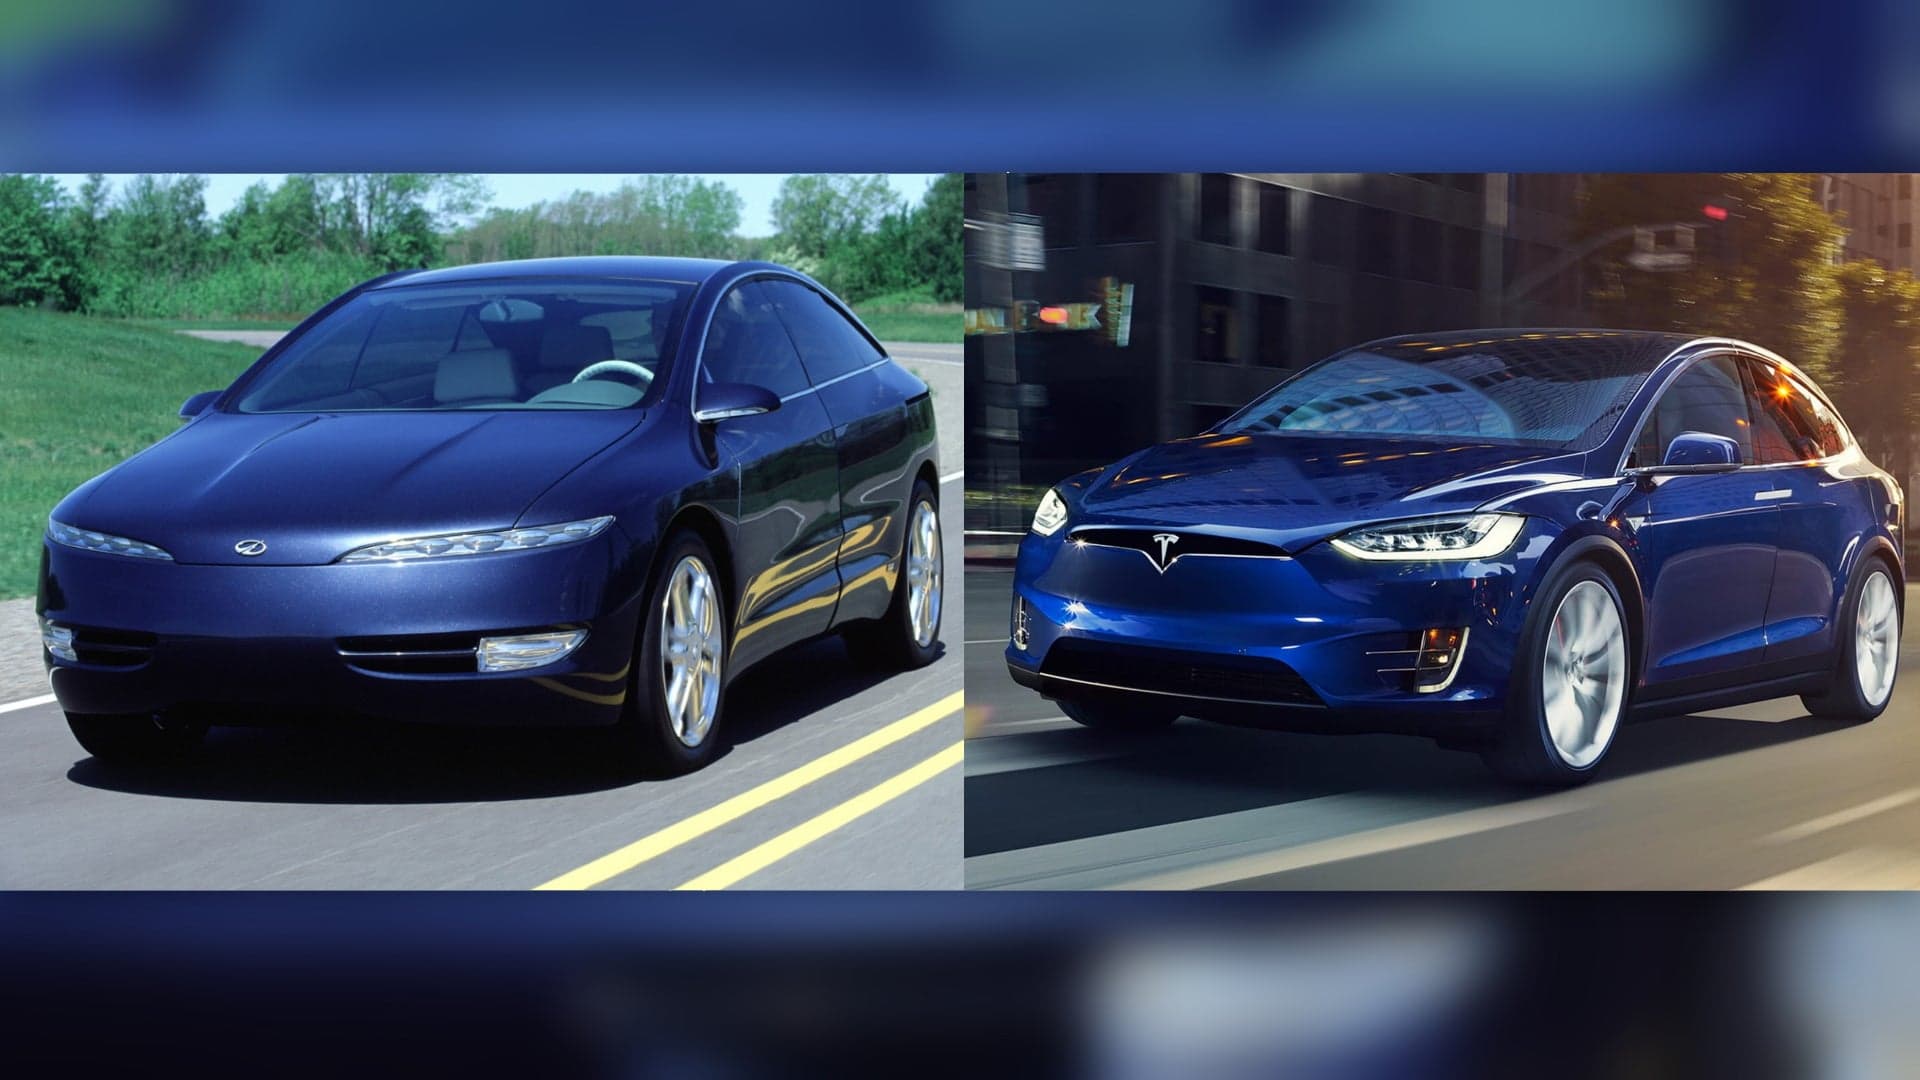 Oldsmobile’s Profile Concept is Remarkably Similar to the Tesla Model X